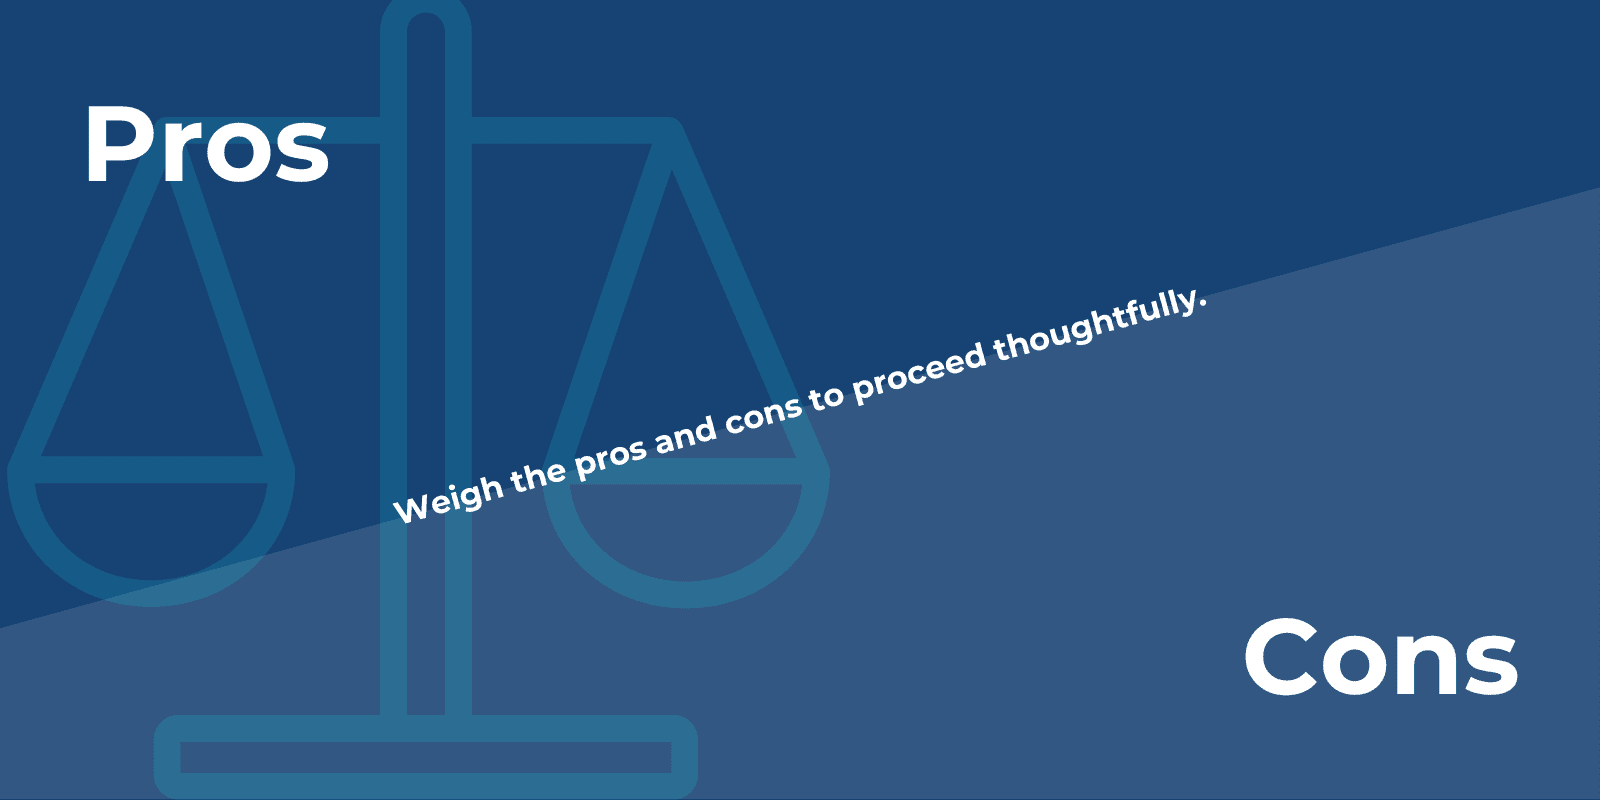 Weigh the pros and cons to proceed thoughtfully with a weight icon on the background